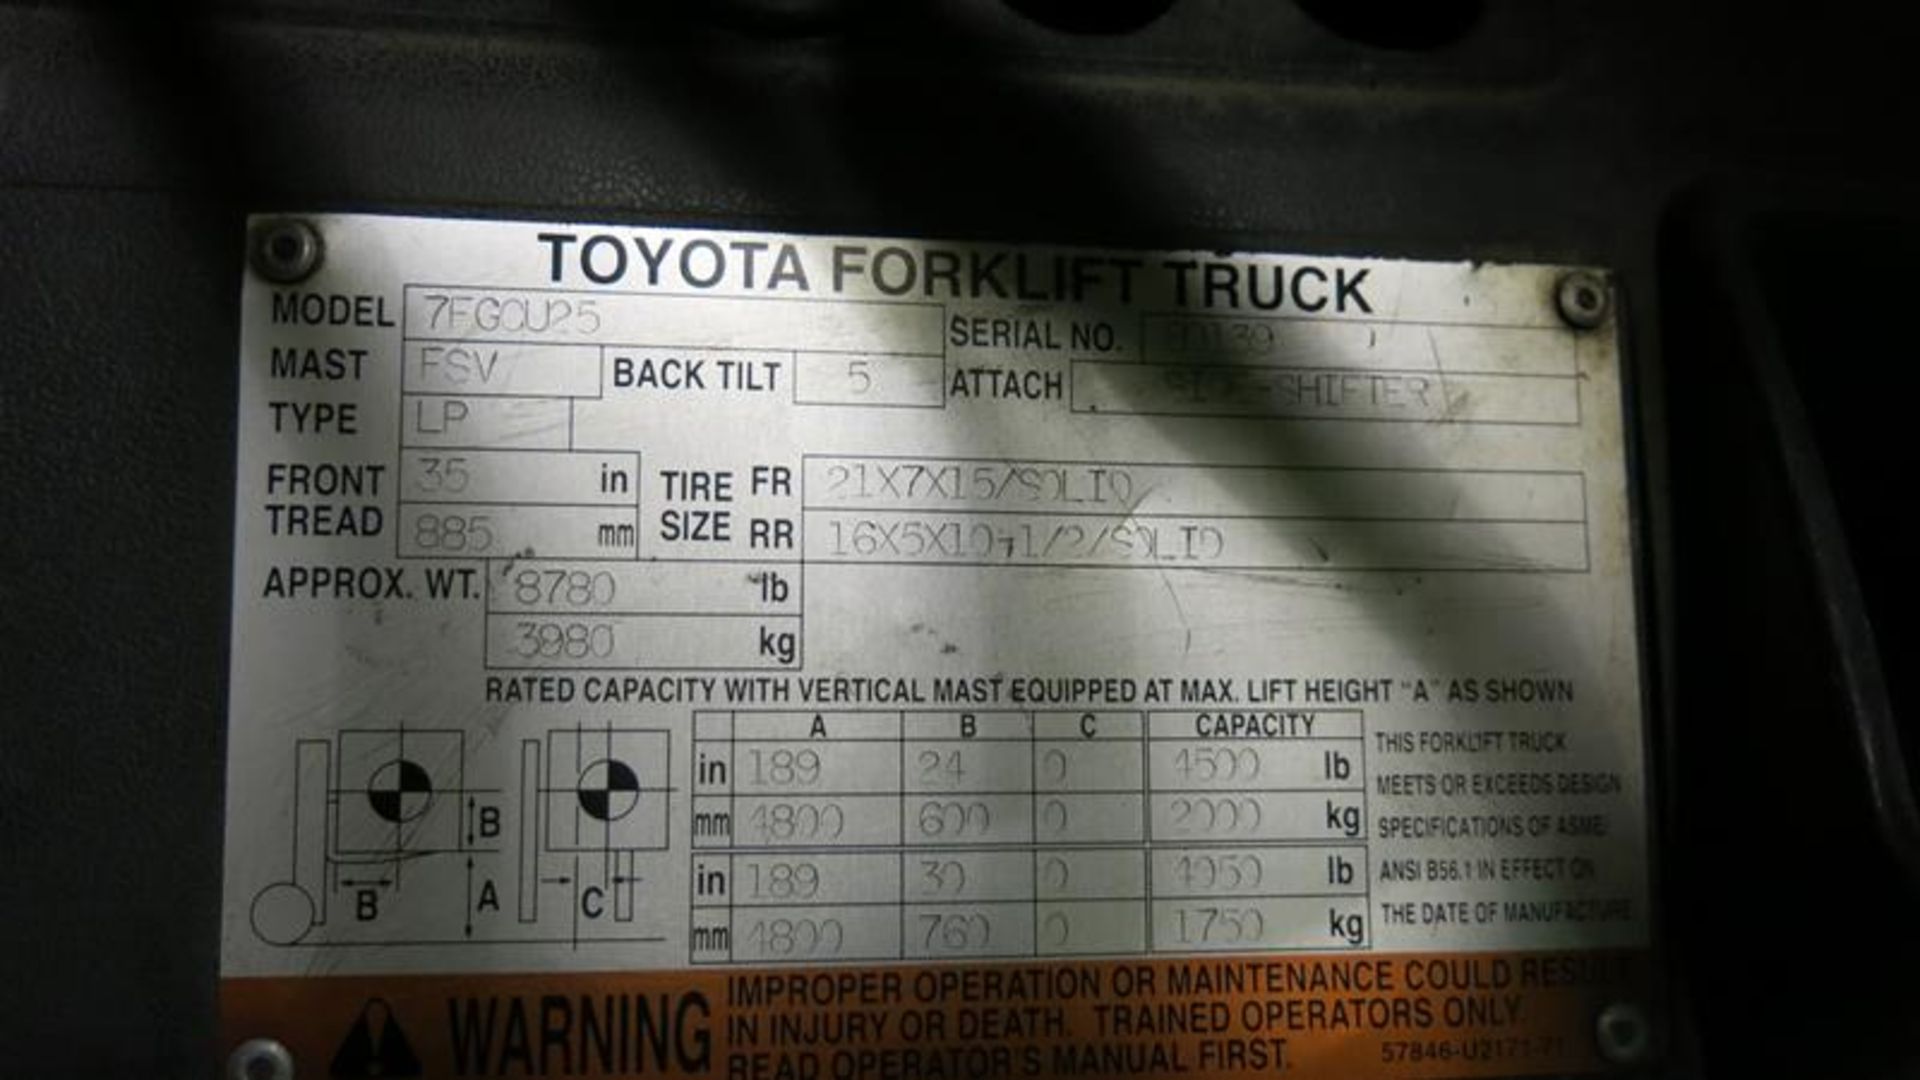 TOYOTA, 7FGCU25, 4,500 LBS, 3 STAGE, LPG FORKLIFT WITH SIDE SHIFT, 189" MAXIMUM LIFT, S/N 80139 - Image 8 of 8